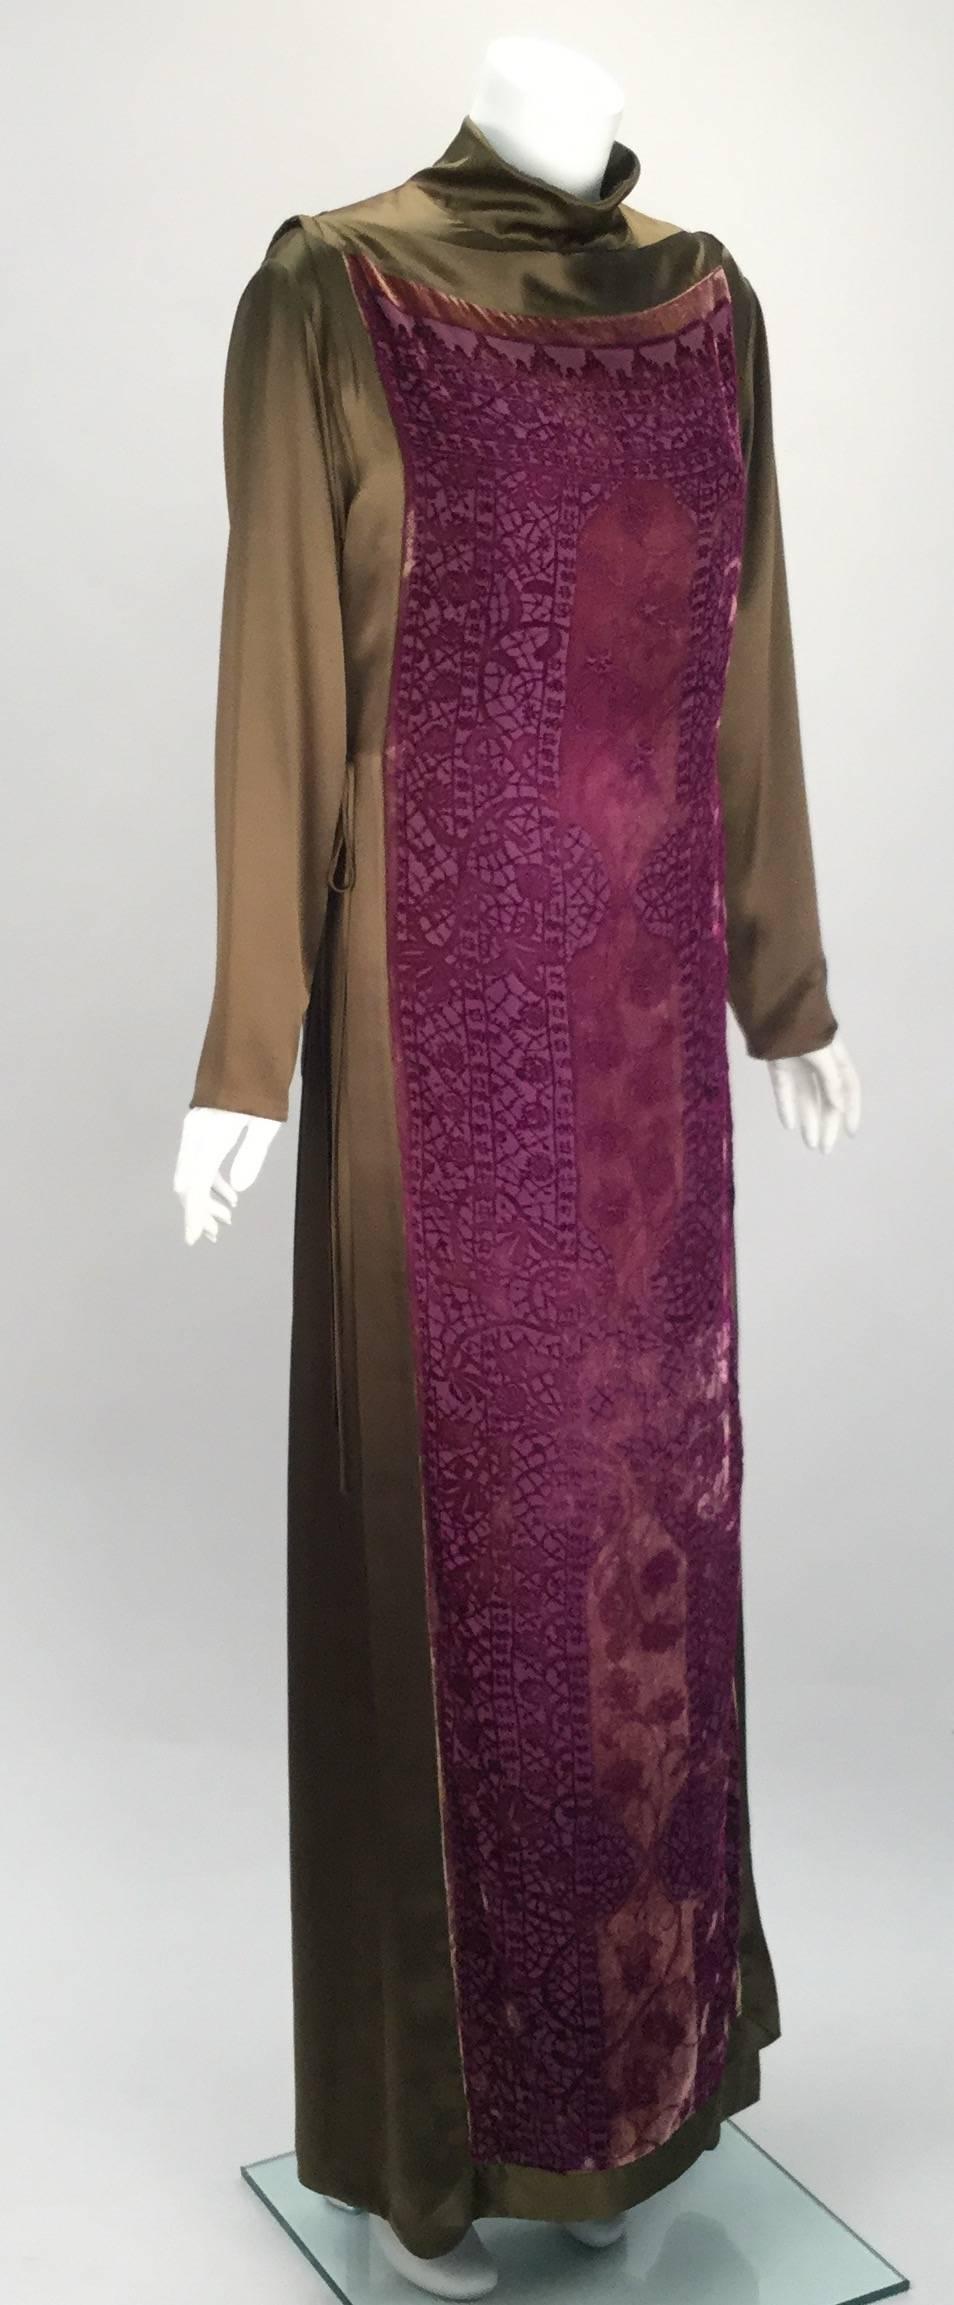 Created by one of our favorite designers most known as the Queen of digitally printed fashion,  Sylvia Heisel, is this unbelievable early olive green silk caftan creation with purple burnout cape. The ensemble is versatile and beautiful in every